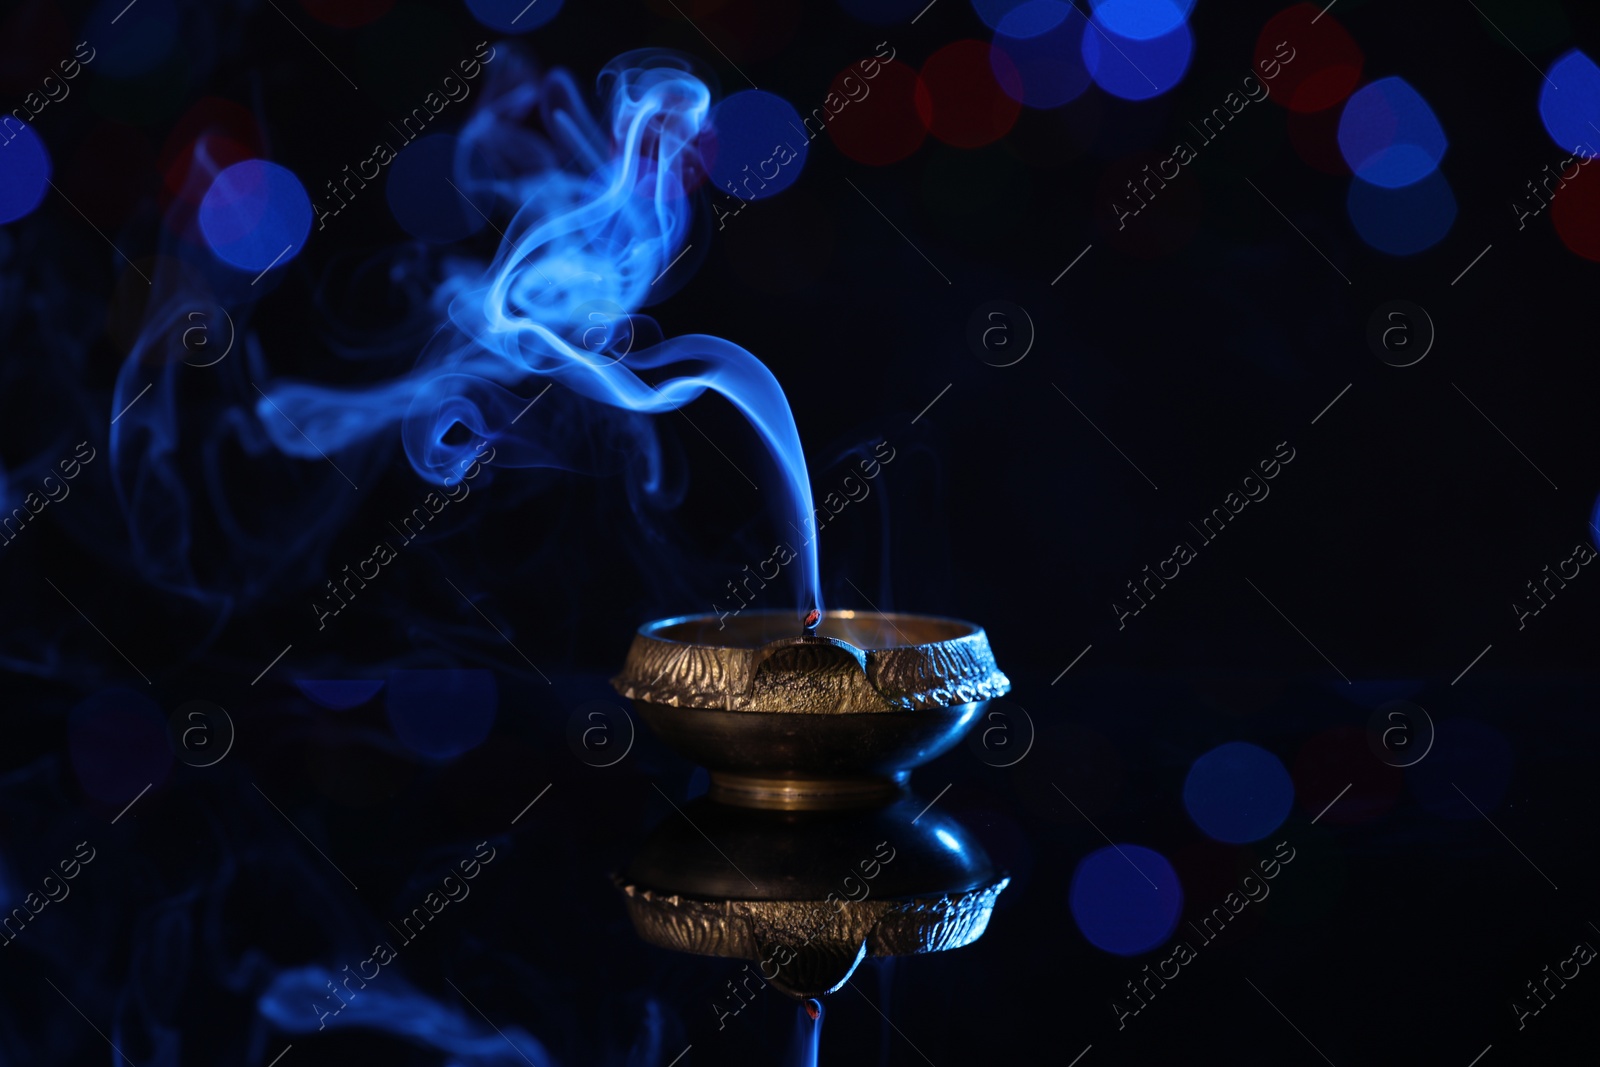 Photo of Blown out diya on dark background with blurred lights. Diwali lamp